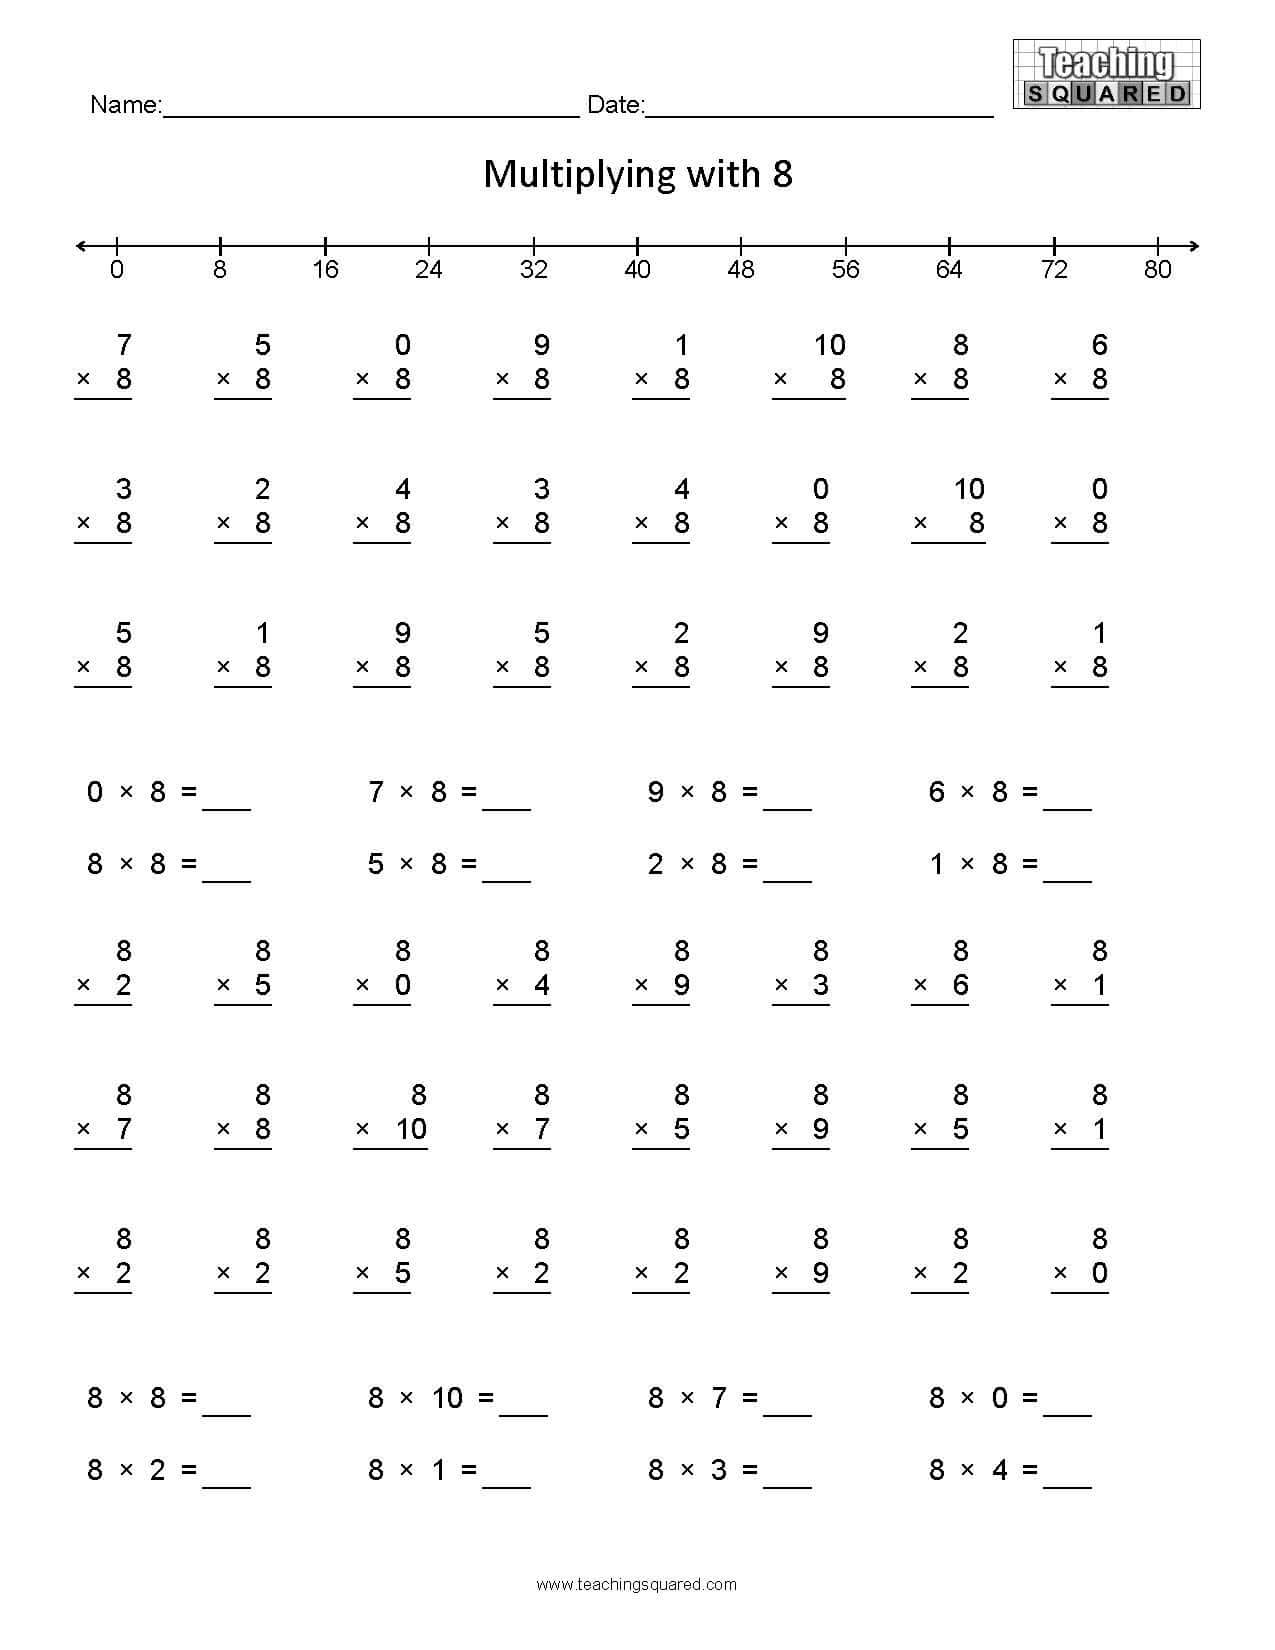 Multiplying with 8 multiplication worksheets